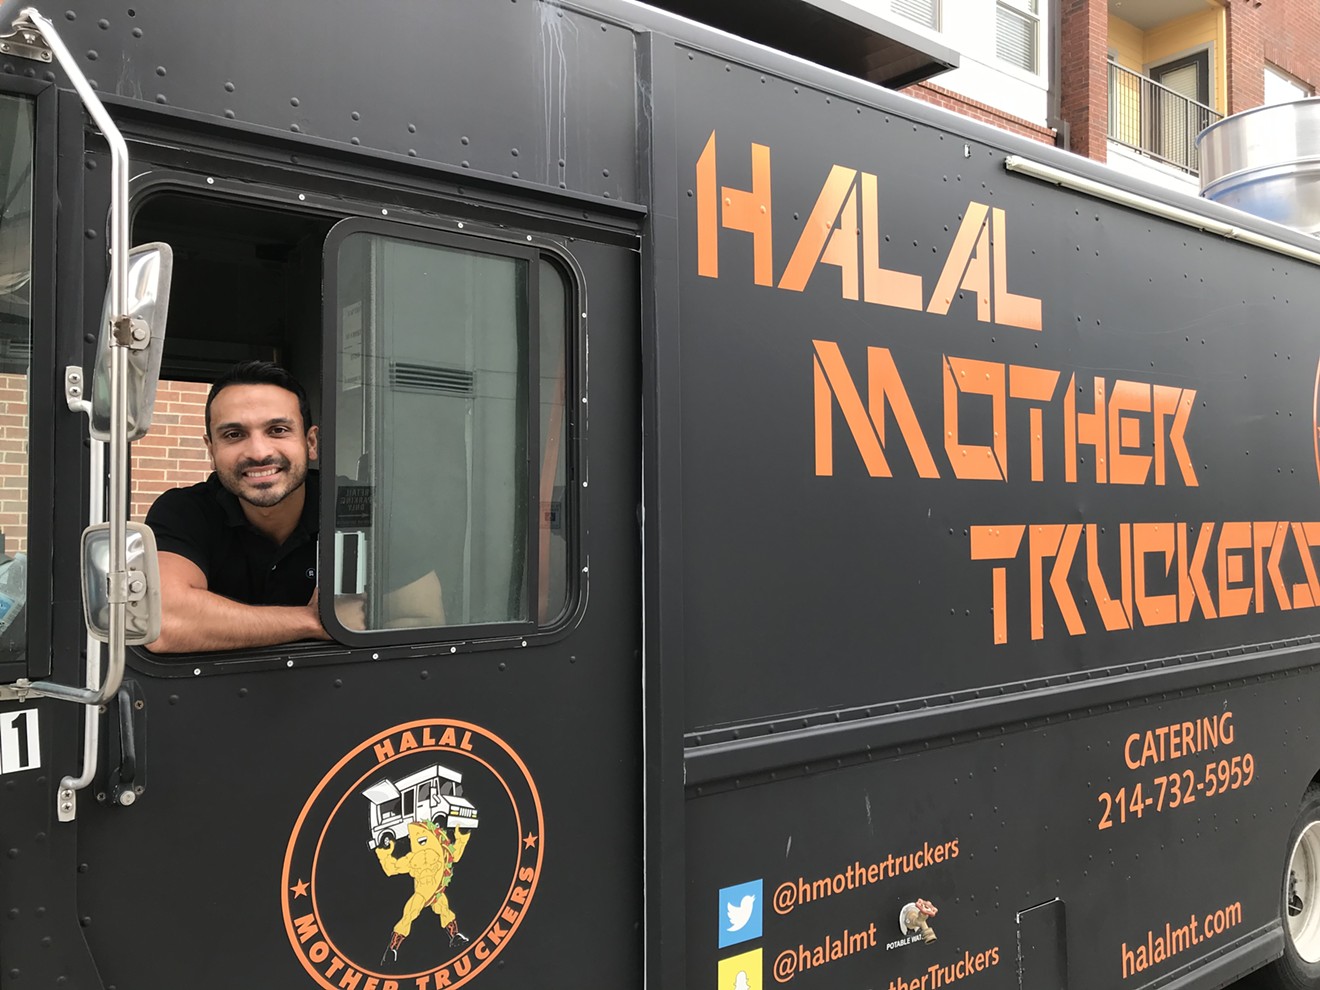 Umar Baig launched Halal Mother Truckers in 2018 with interesting dishes like tikka fries and butter chicken tacos.